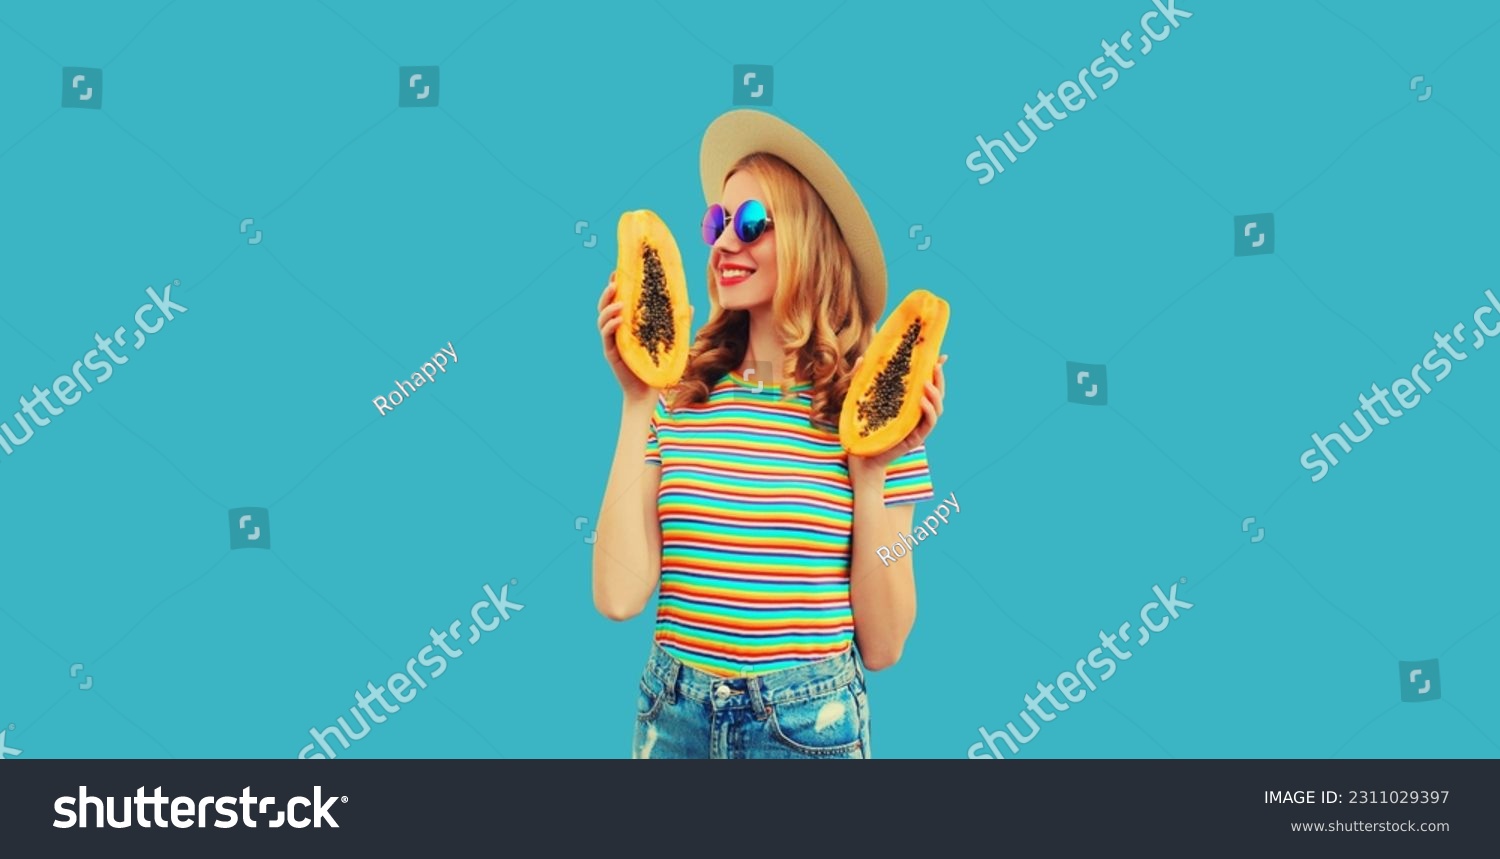 Summer portrait of happy cheerful young woman having fun with fresh papaya fruits wearing straw hat, sunglasses on blue background #2311029397